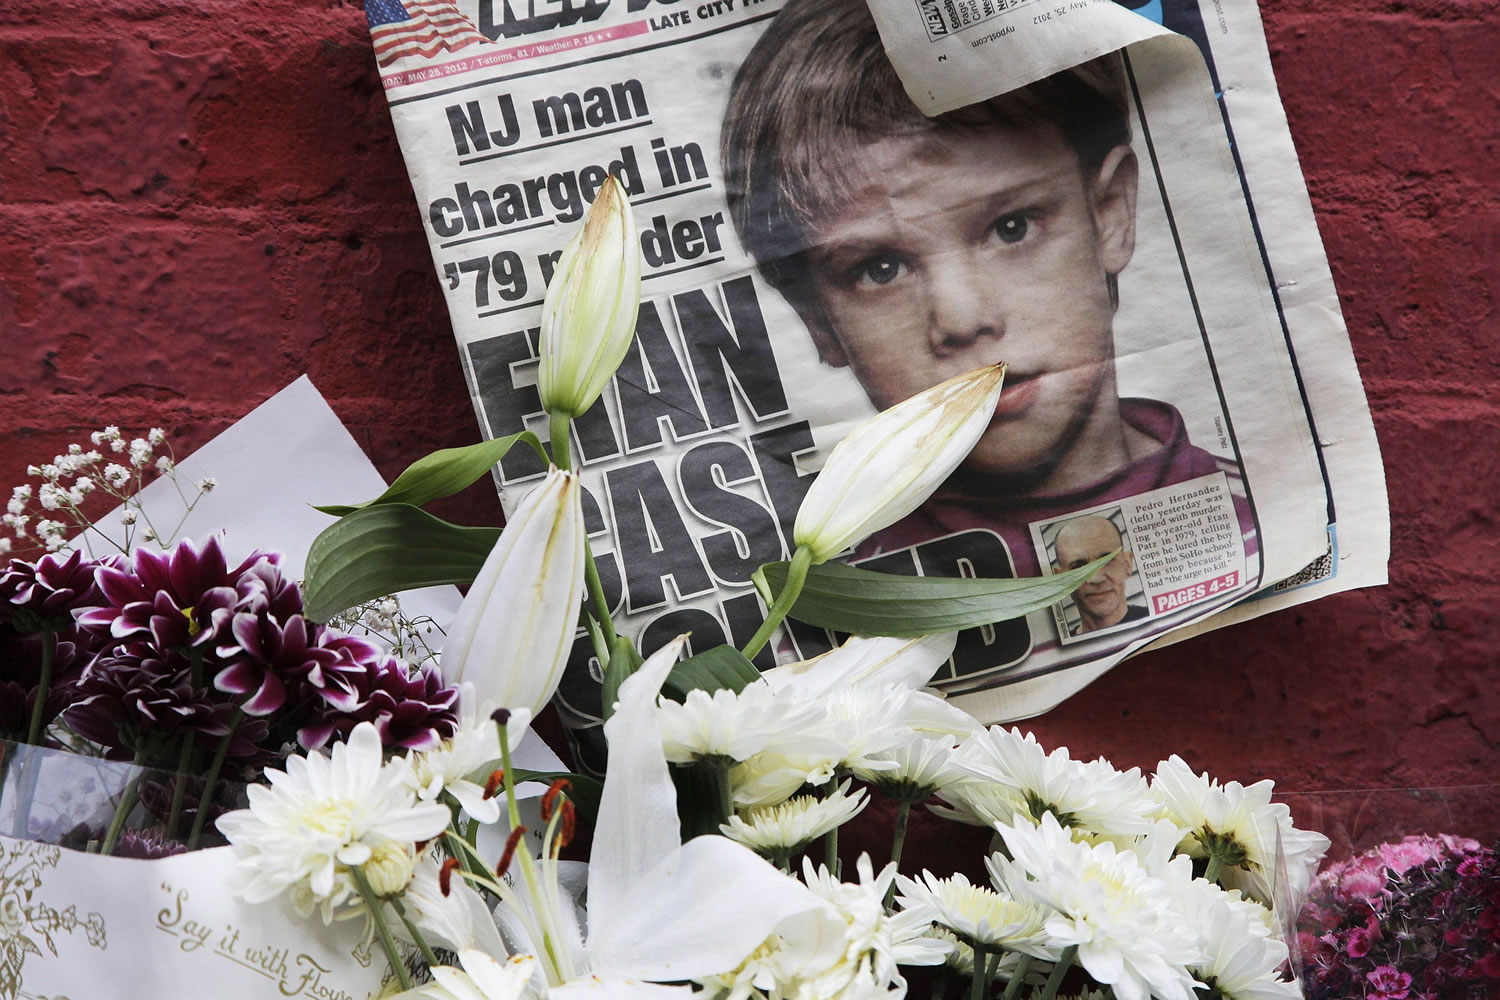 A newspaper with a photograph of Etan Patz is part of a makeshift memorial in the SoHo neighborhood of New York where Patz lived before his disappearance on May 25, 1979. The memorial was set up near a building that housed a convenience store where Pedro Hernandez, accused of killing Patz, told police 33 years after they boy's disappearance that he choked the 6-year-old and put the still-living boy into a plastic bag, boxed up the bag and left it on a street. Opening statements in Hernandez's trial are Friday.